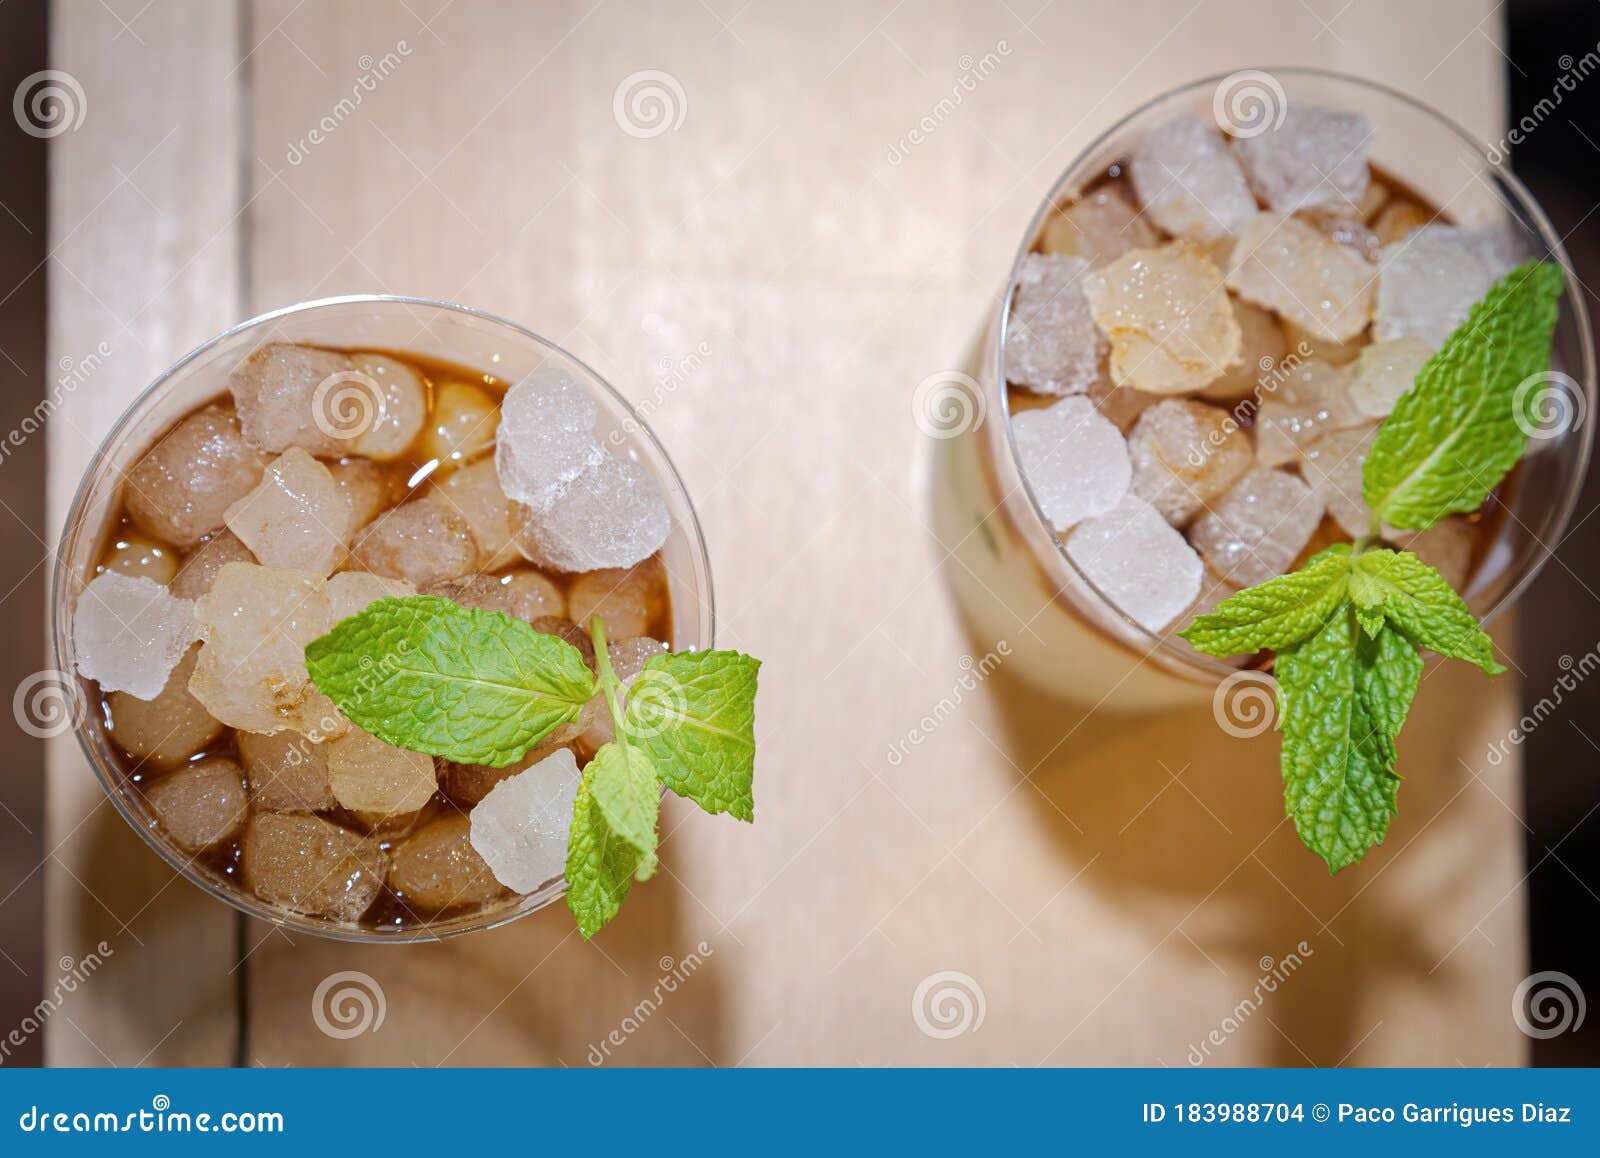 two glasses of mojito with ssu ice